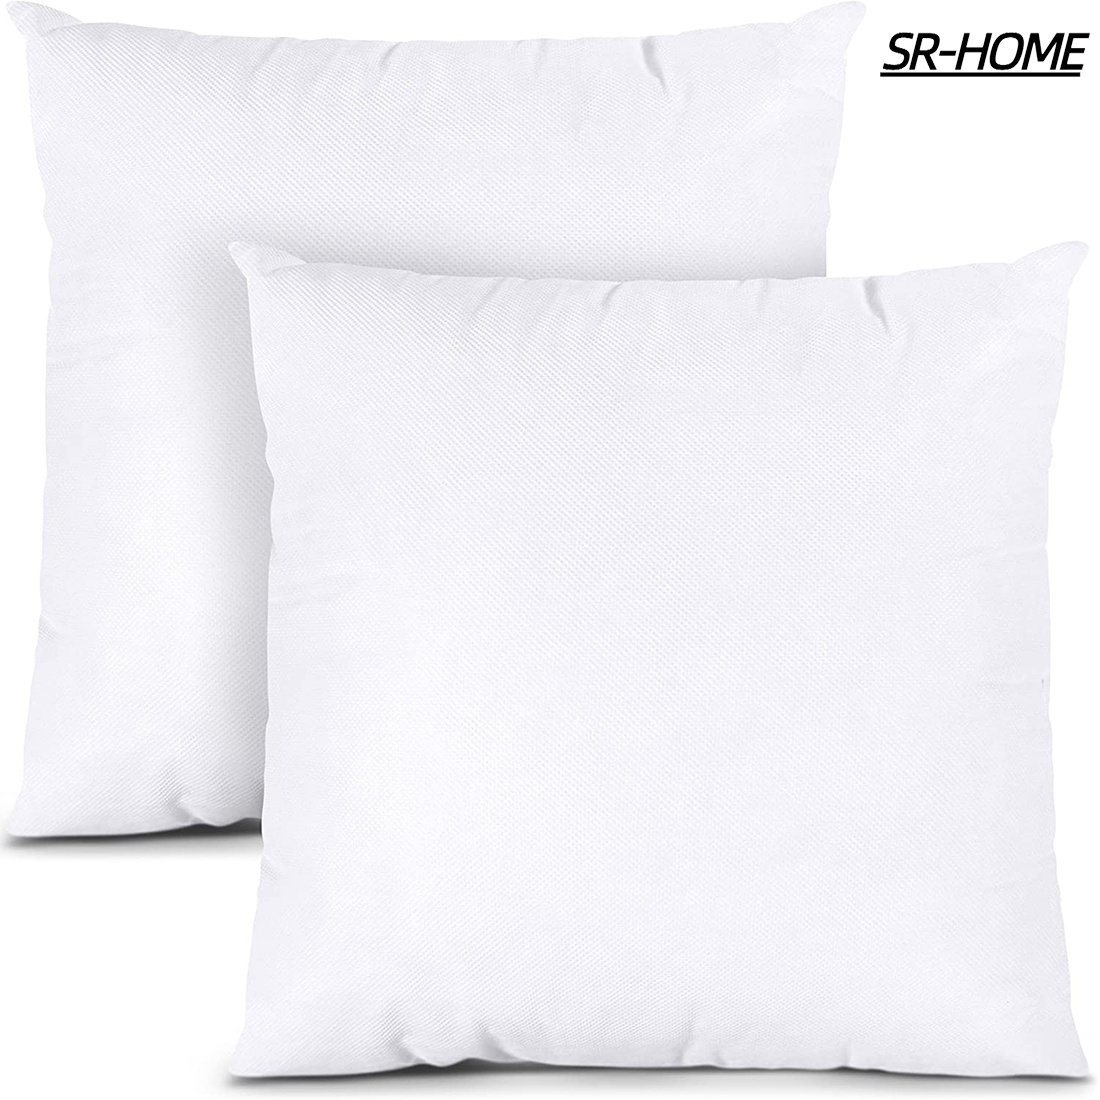 ALL SIZE Pillow Inserts Soft Microfiber Throw Pillow Form Fill